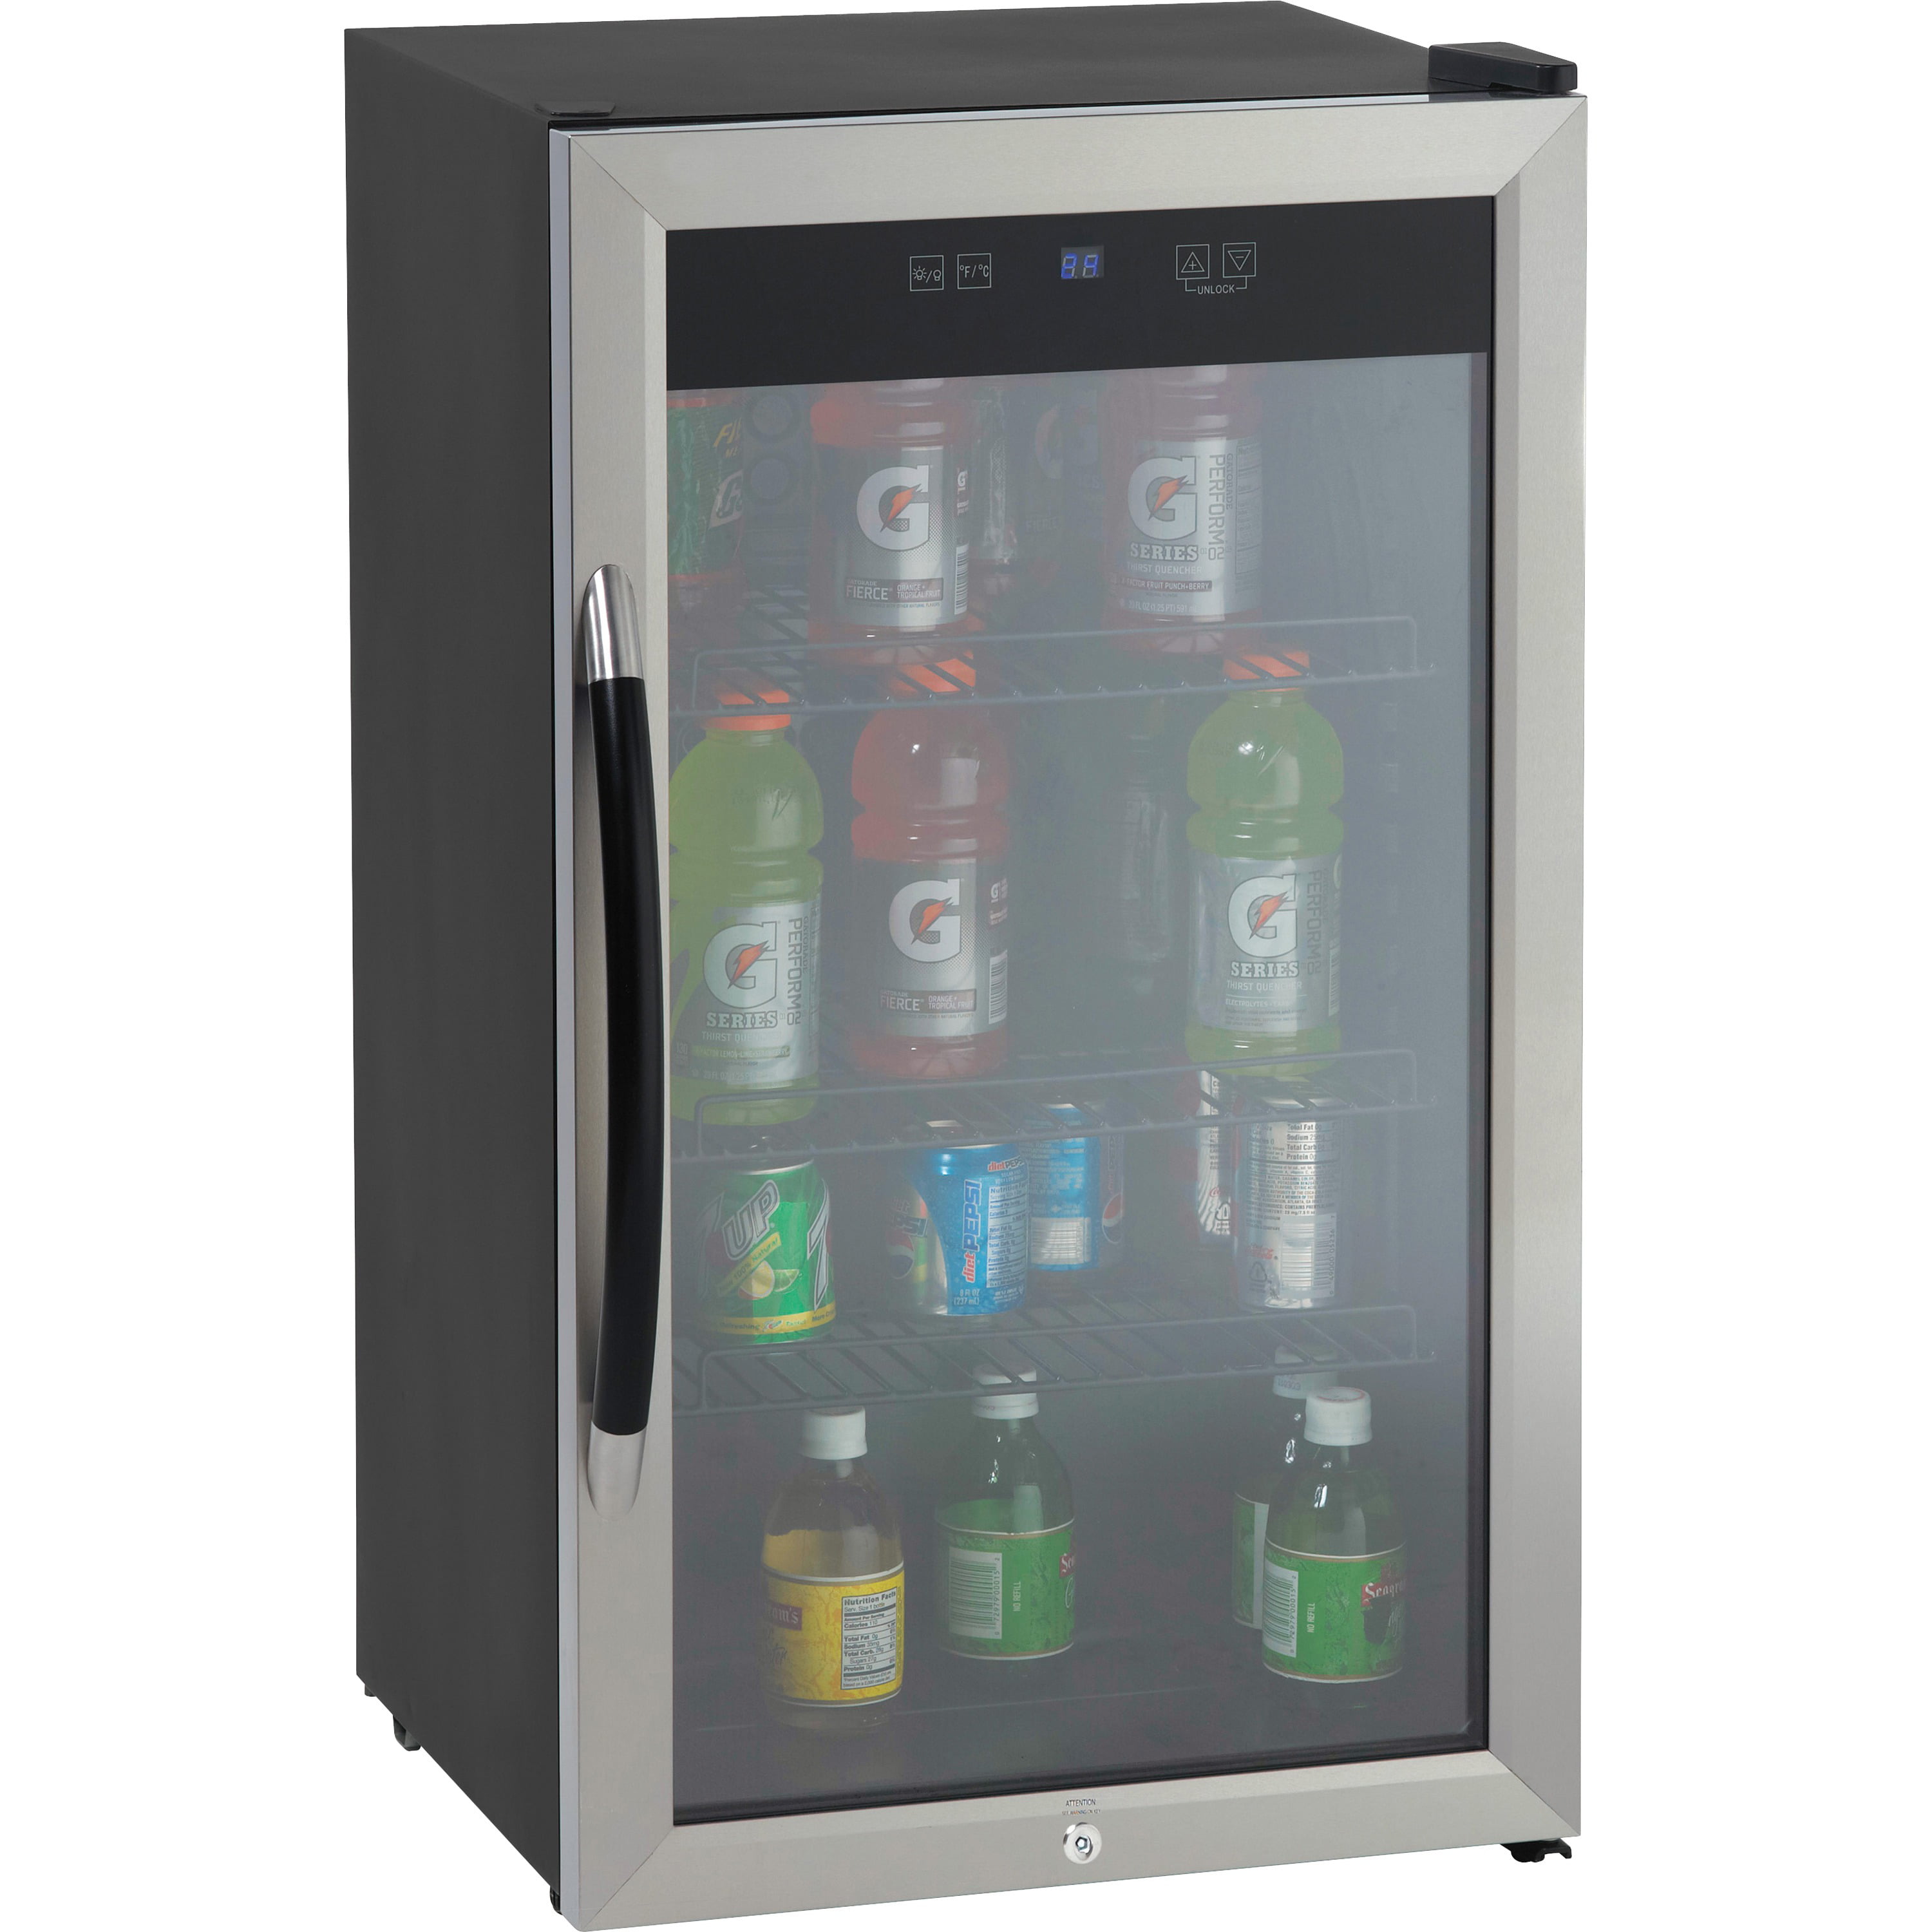 Black Cabinet Auto Defrost Summit Appliance SPR489OSADA ADA Compliant Commercially Approved Shallow Depth Indoor/Outdoor Beverage Cooler for Built-in or Freestanding Use with Glass Door